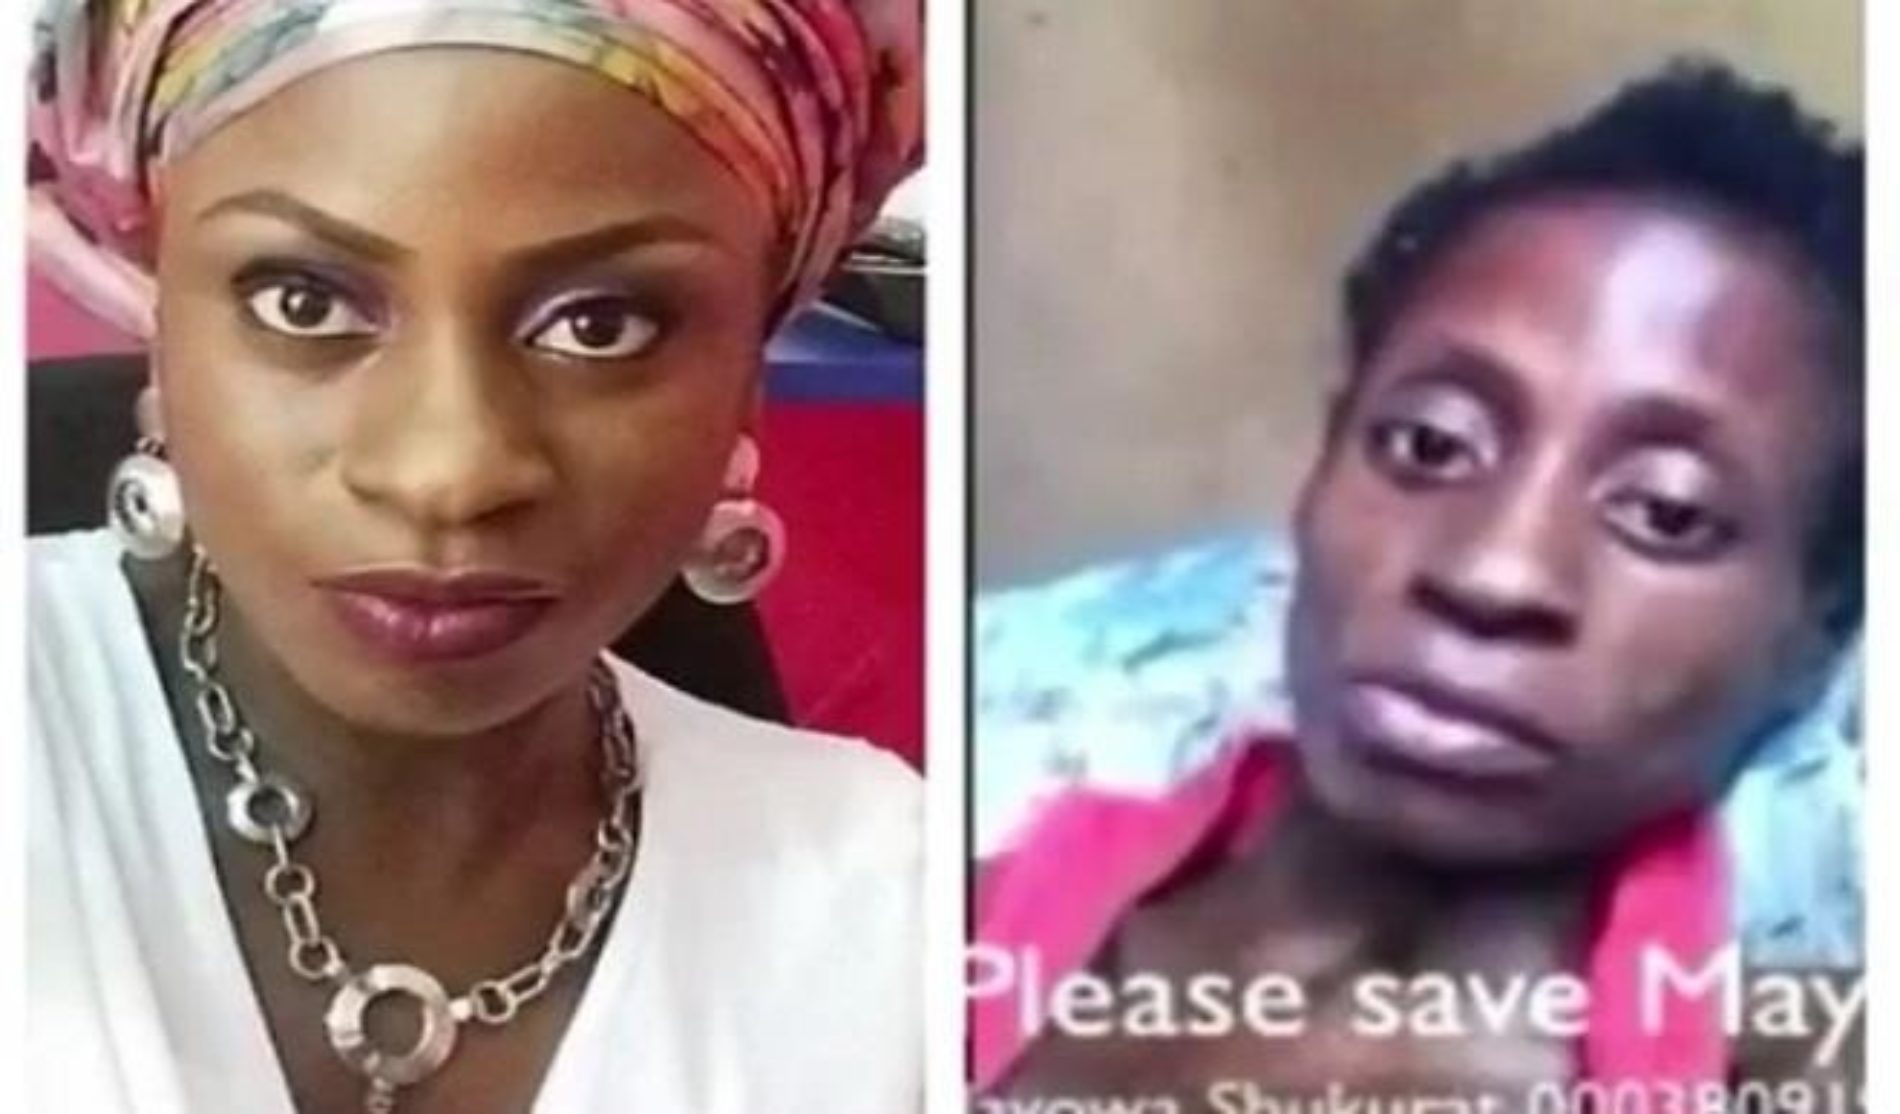 #SaveMayowa is reportedly a scam. She was sick but beyond treatment, and her family stole money from Nigerians